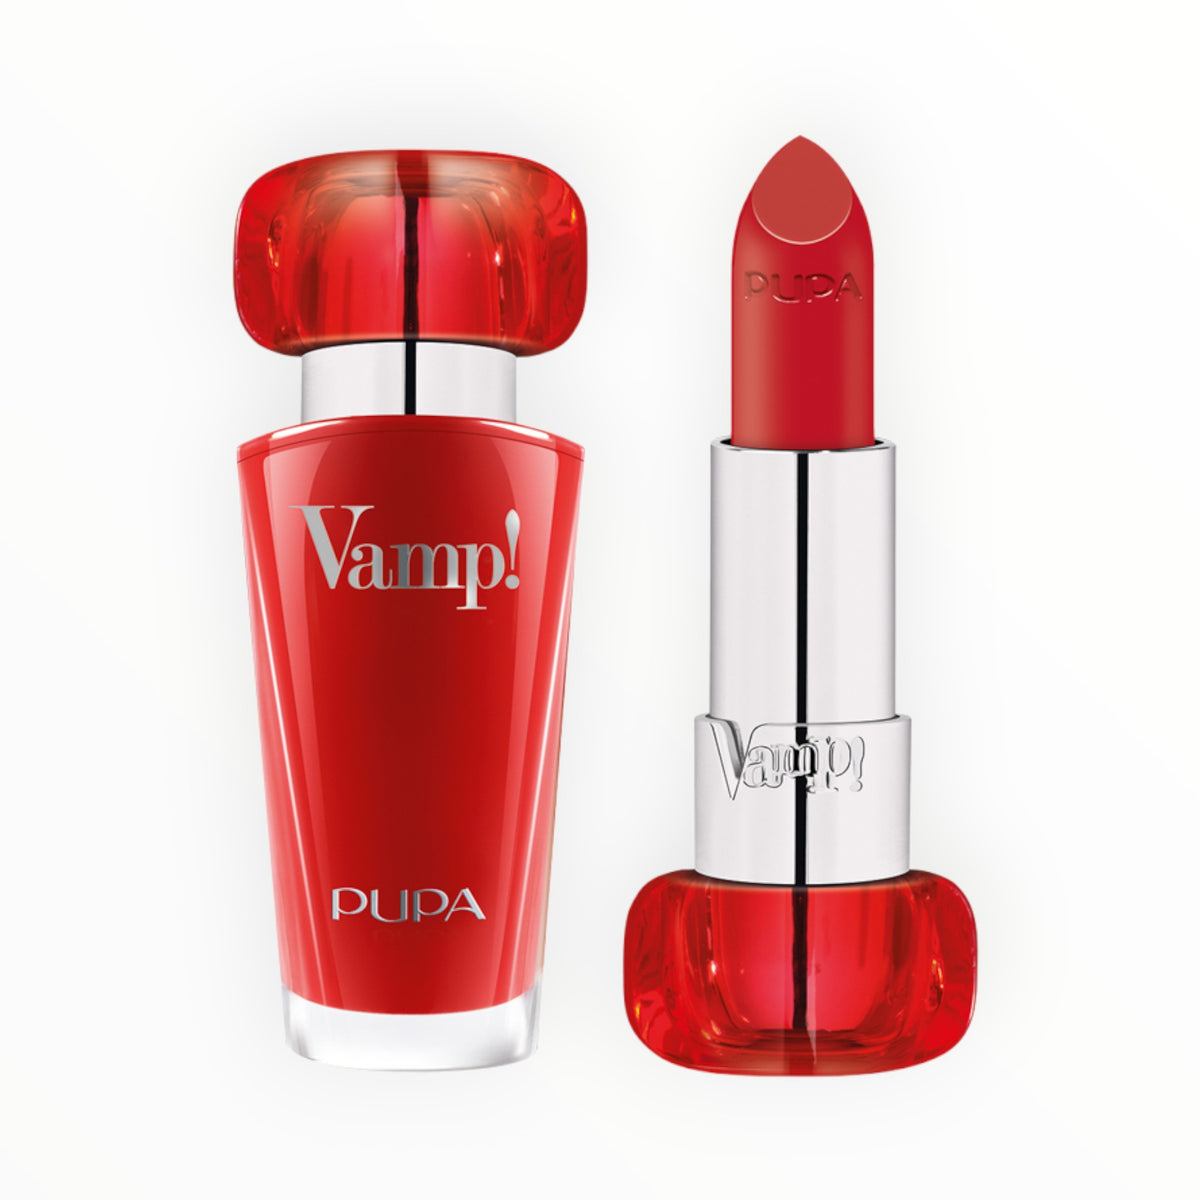 Pupa Milano VAMP!Extreme Colour Lipstick 303 Iconic Red 3.5gr